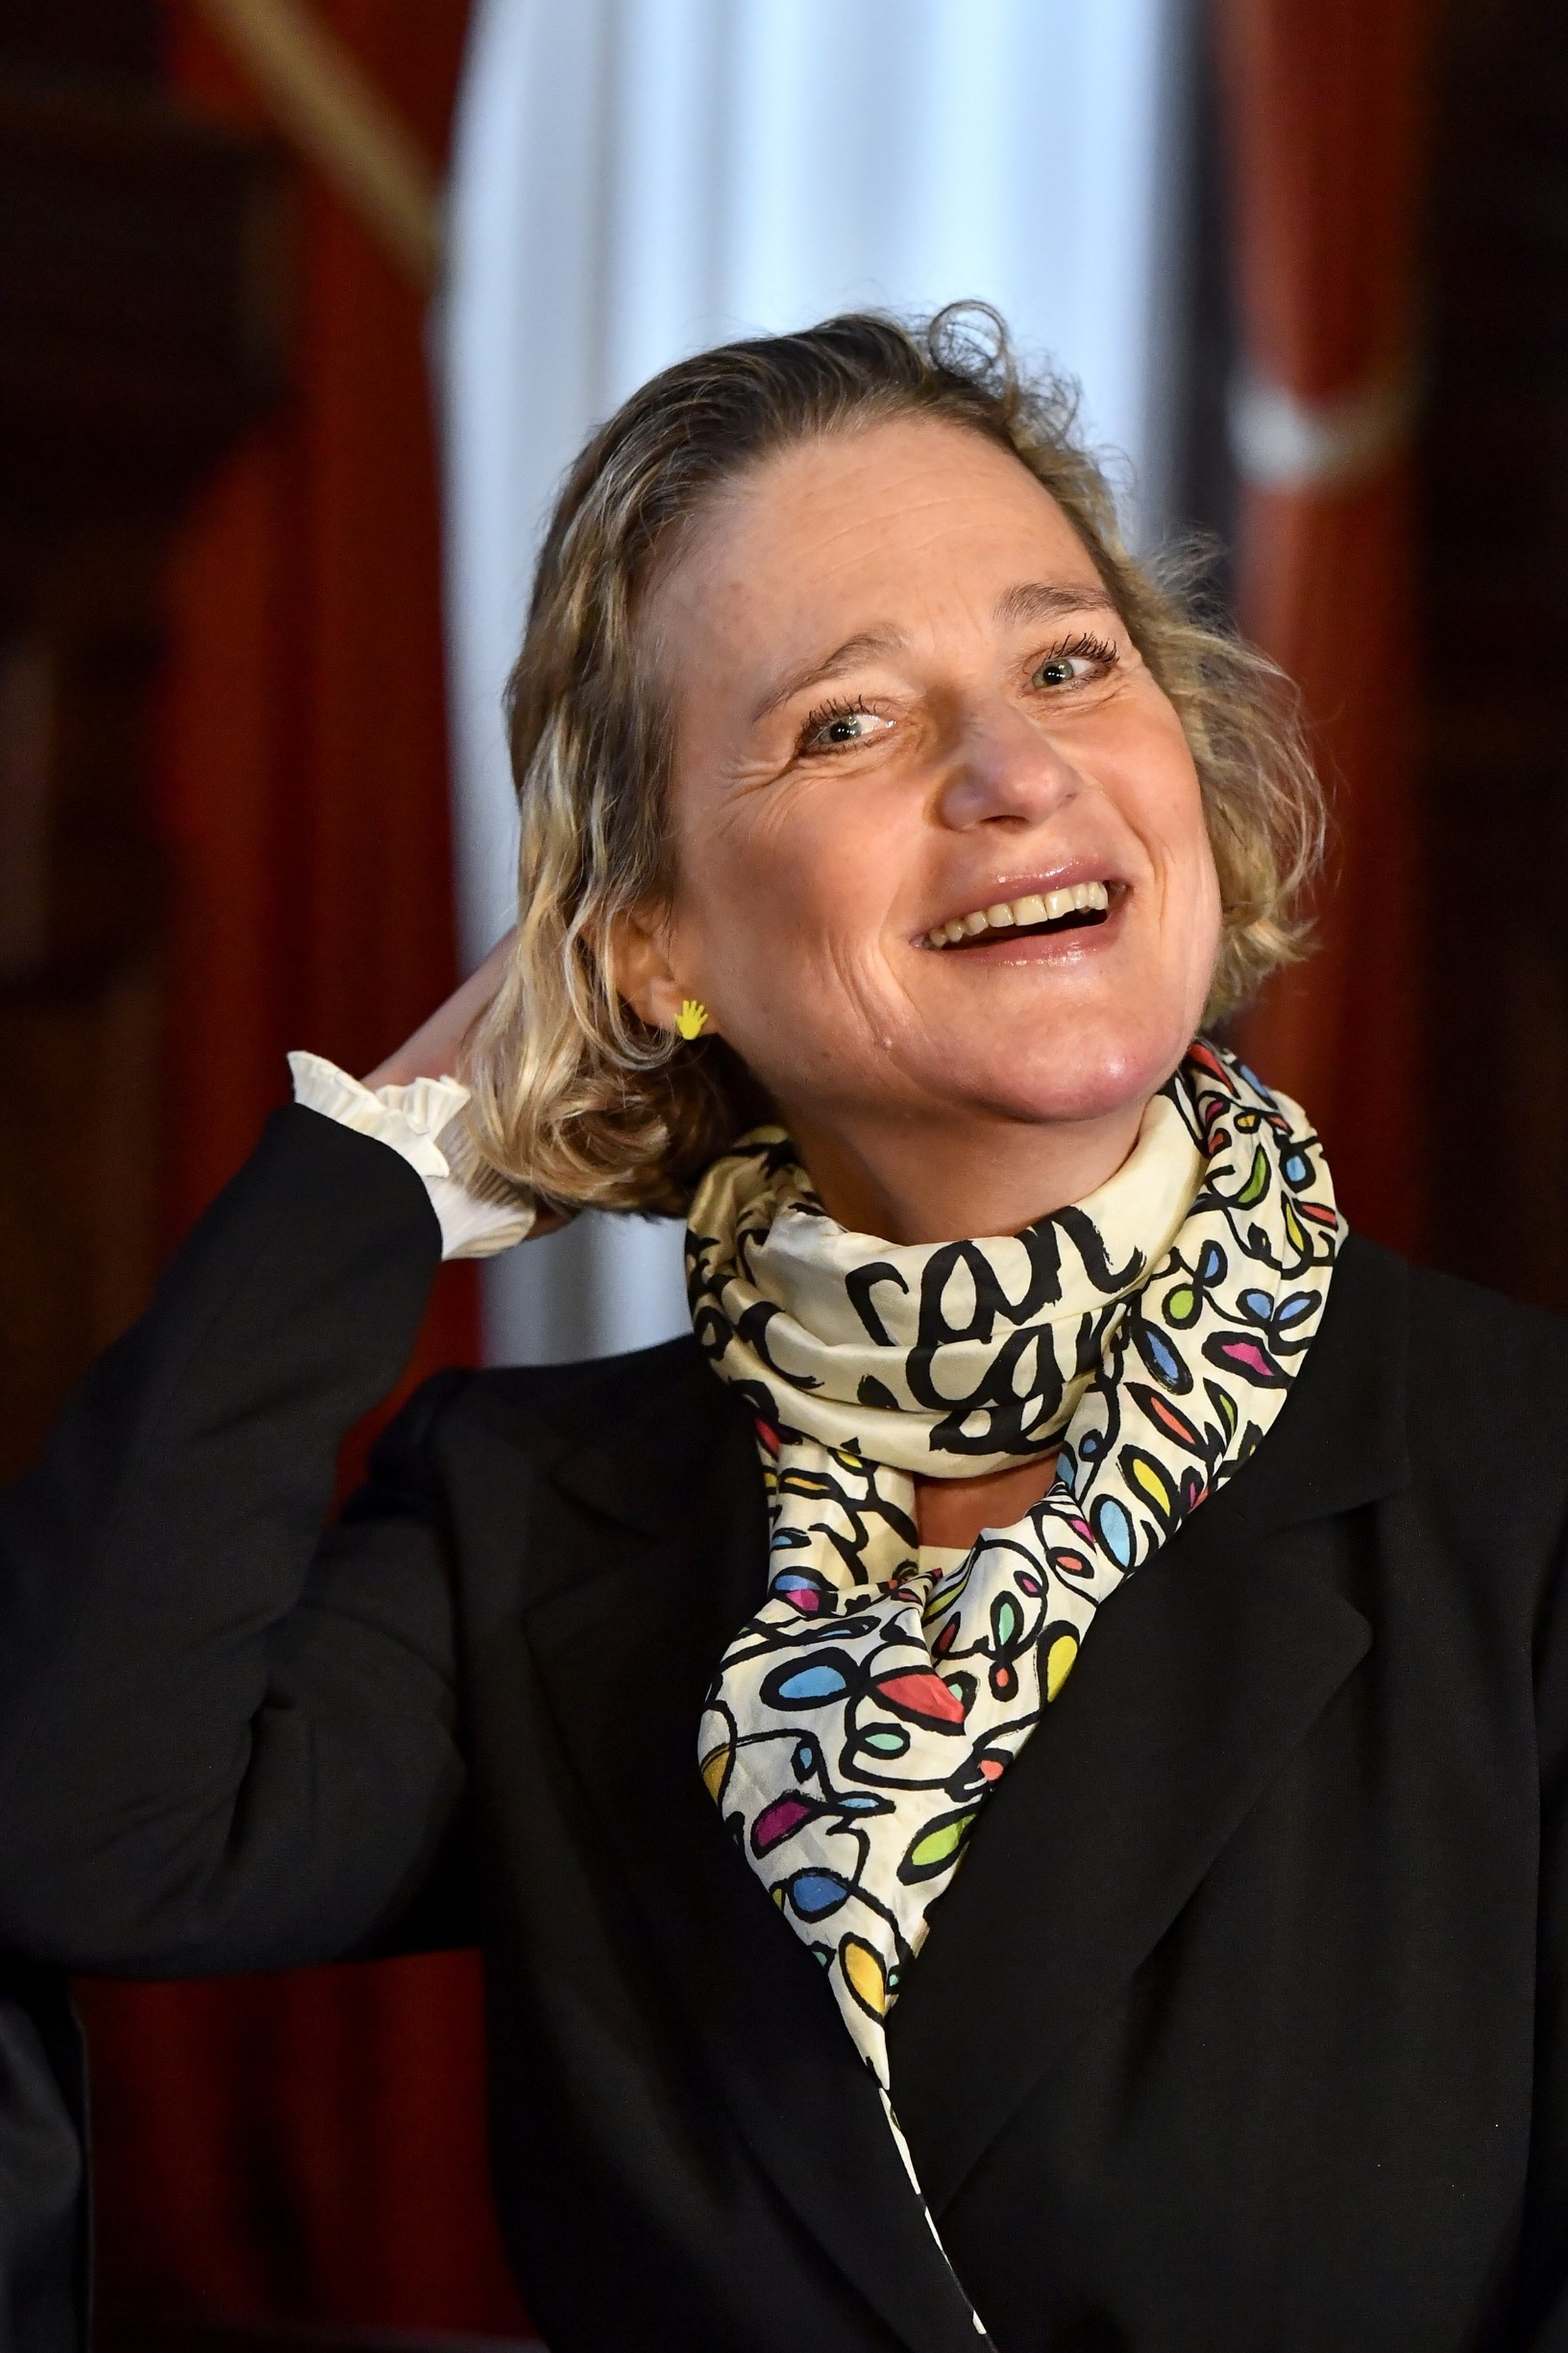 December 13, 2019, Brussels, BELGIUM: Belgian artist Delphine Boel pictured after a session at the Cassation Court following the demand of King Albert II to contest the arrest of Brussels appeal court from 25 October 2018 which established that Jacques Boel is not the father of Delphine Boel and which asks for King Albert II to take a DNA test with wich Delphine Boel intends to prove she is Albert II's biological daughter, Friday 13 December 2019, in Brussels. BELGA PHOTO DIRK WAEM, Image: 487942561, License: Rights-managed, Restrictions: * EXCLUSIVE to ZUMA: Belgium, France, Germany, Luxembourg and Netherlands Rights OUT *, Model Release: no, Credit line: Dirk Waem / Zuma Press / Profimedia